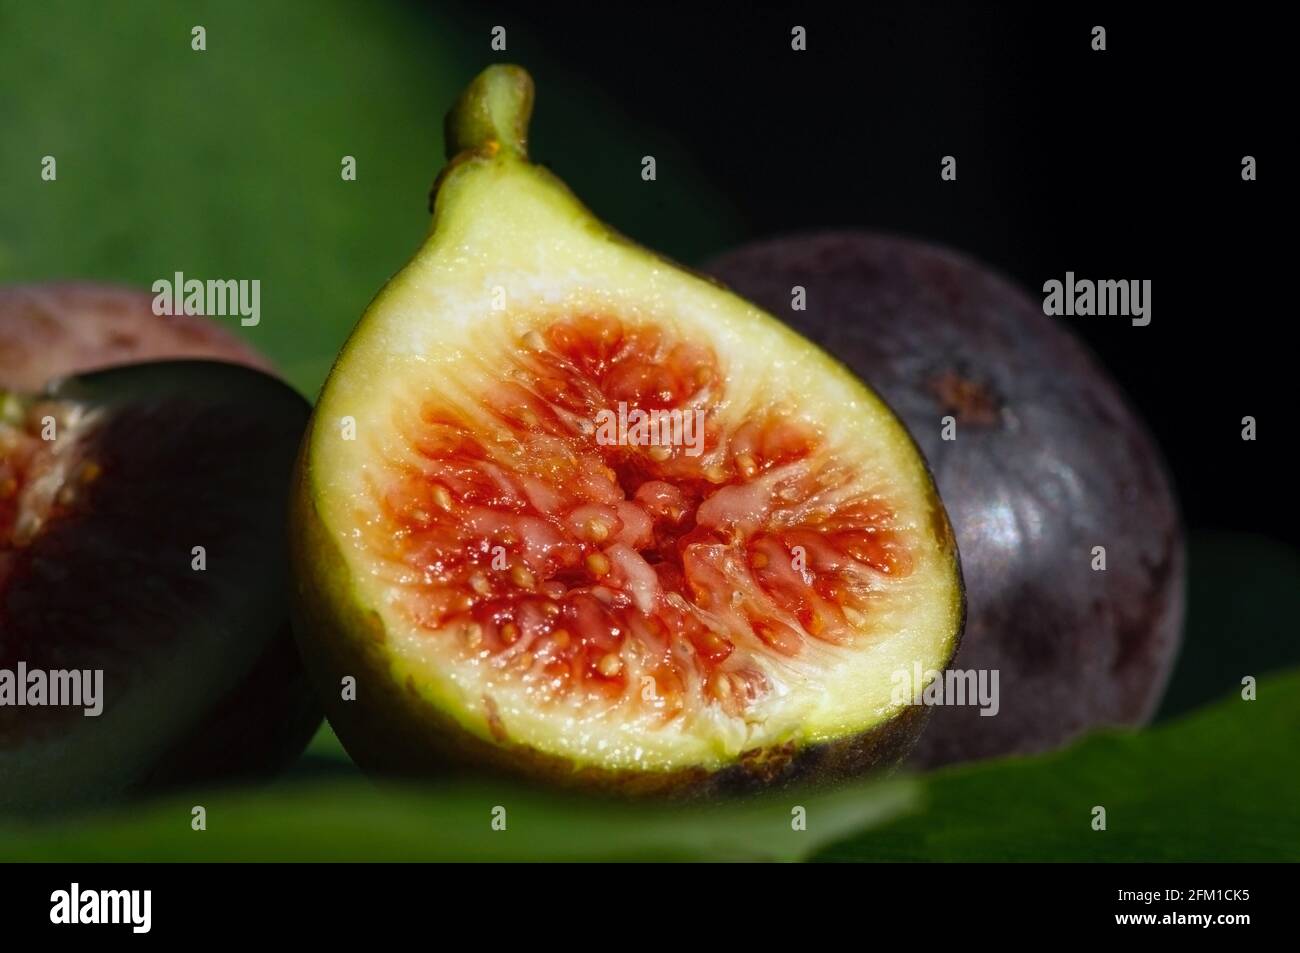 Close up of fresh ripe Tin fruits, Fig fruits, in shallow focus. The Scientific name of this fruits is Ficus carica, a species of flowering plant in t Stock Photo